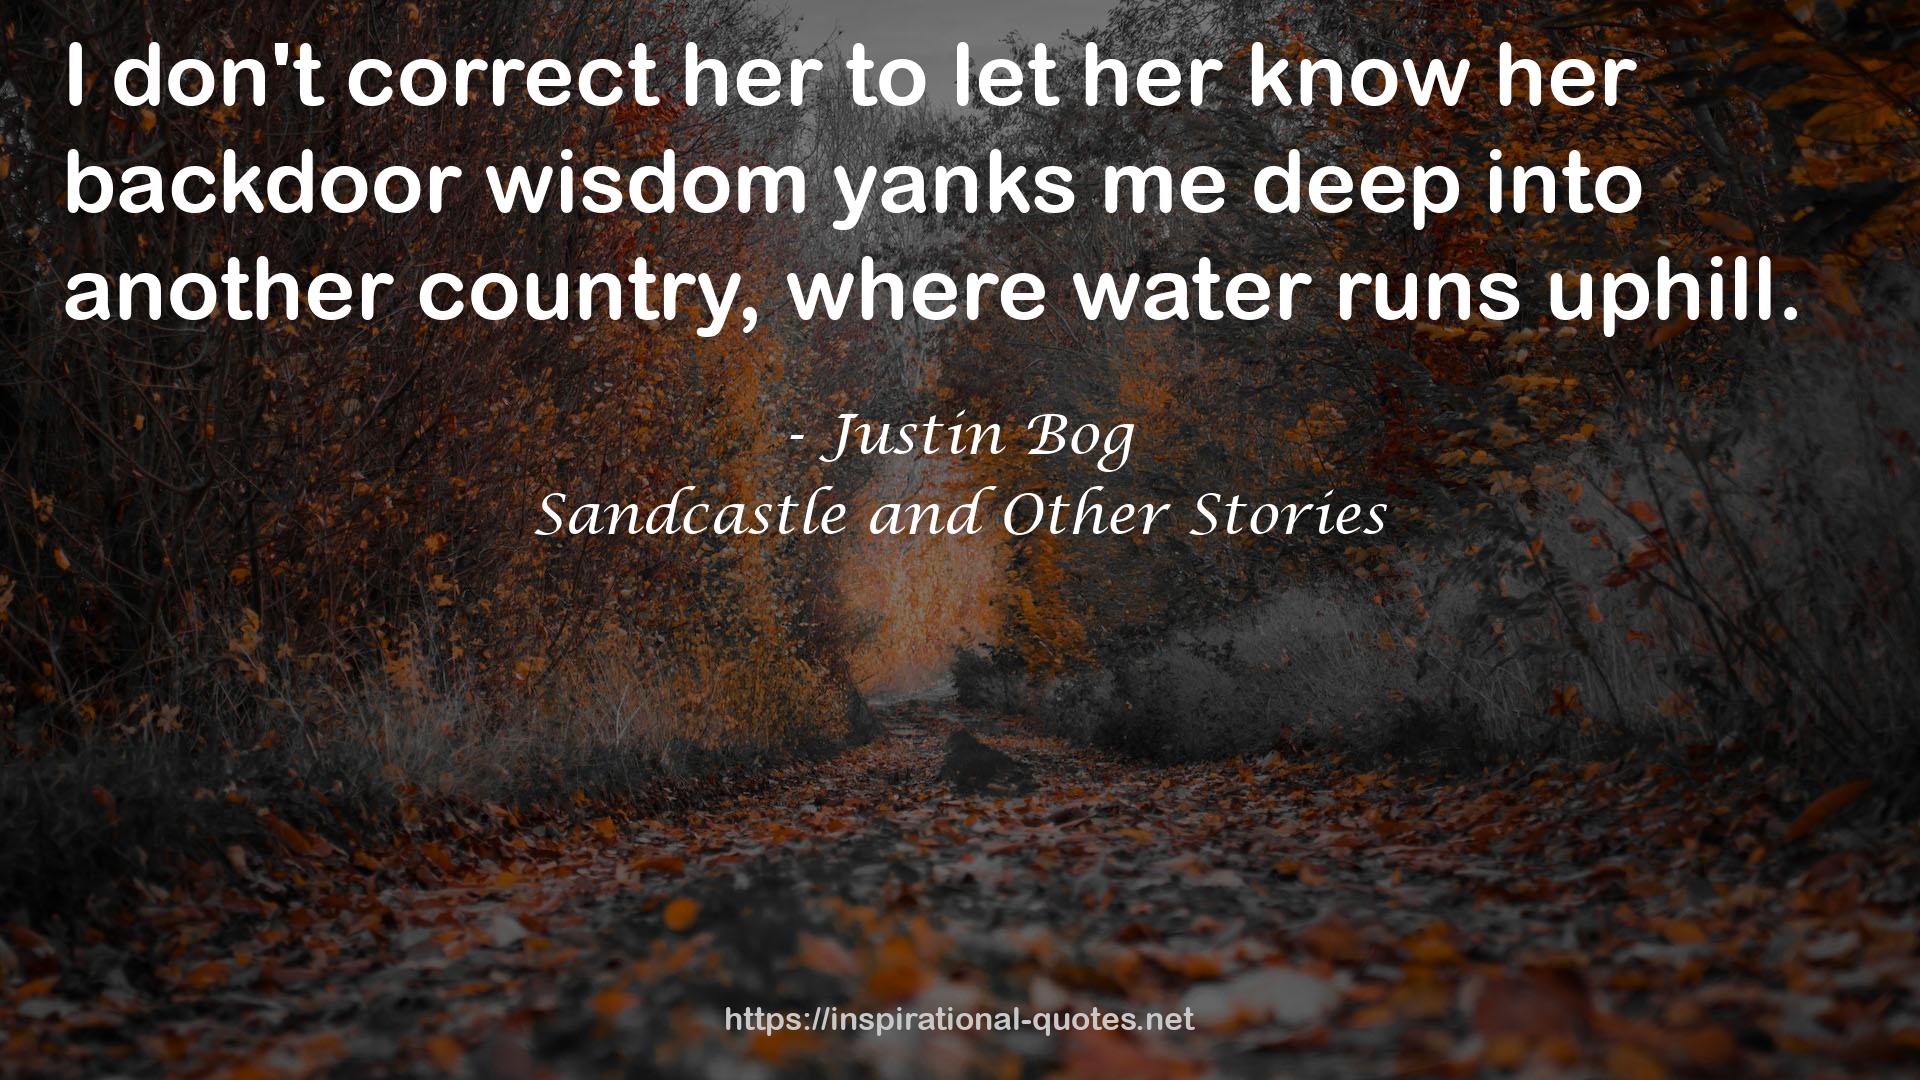 Sandcastle and Other Stories QUOTES